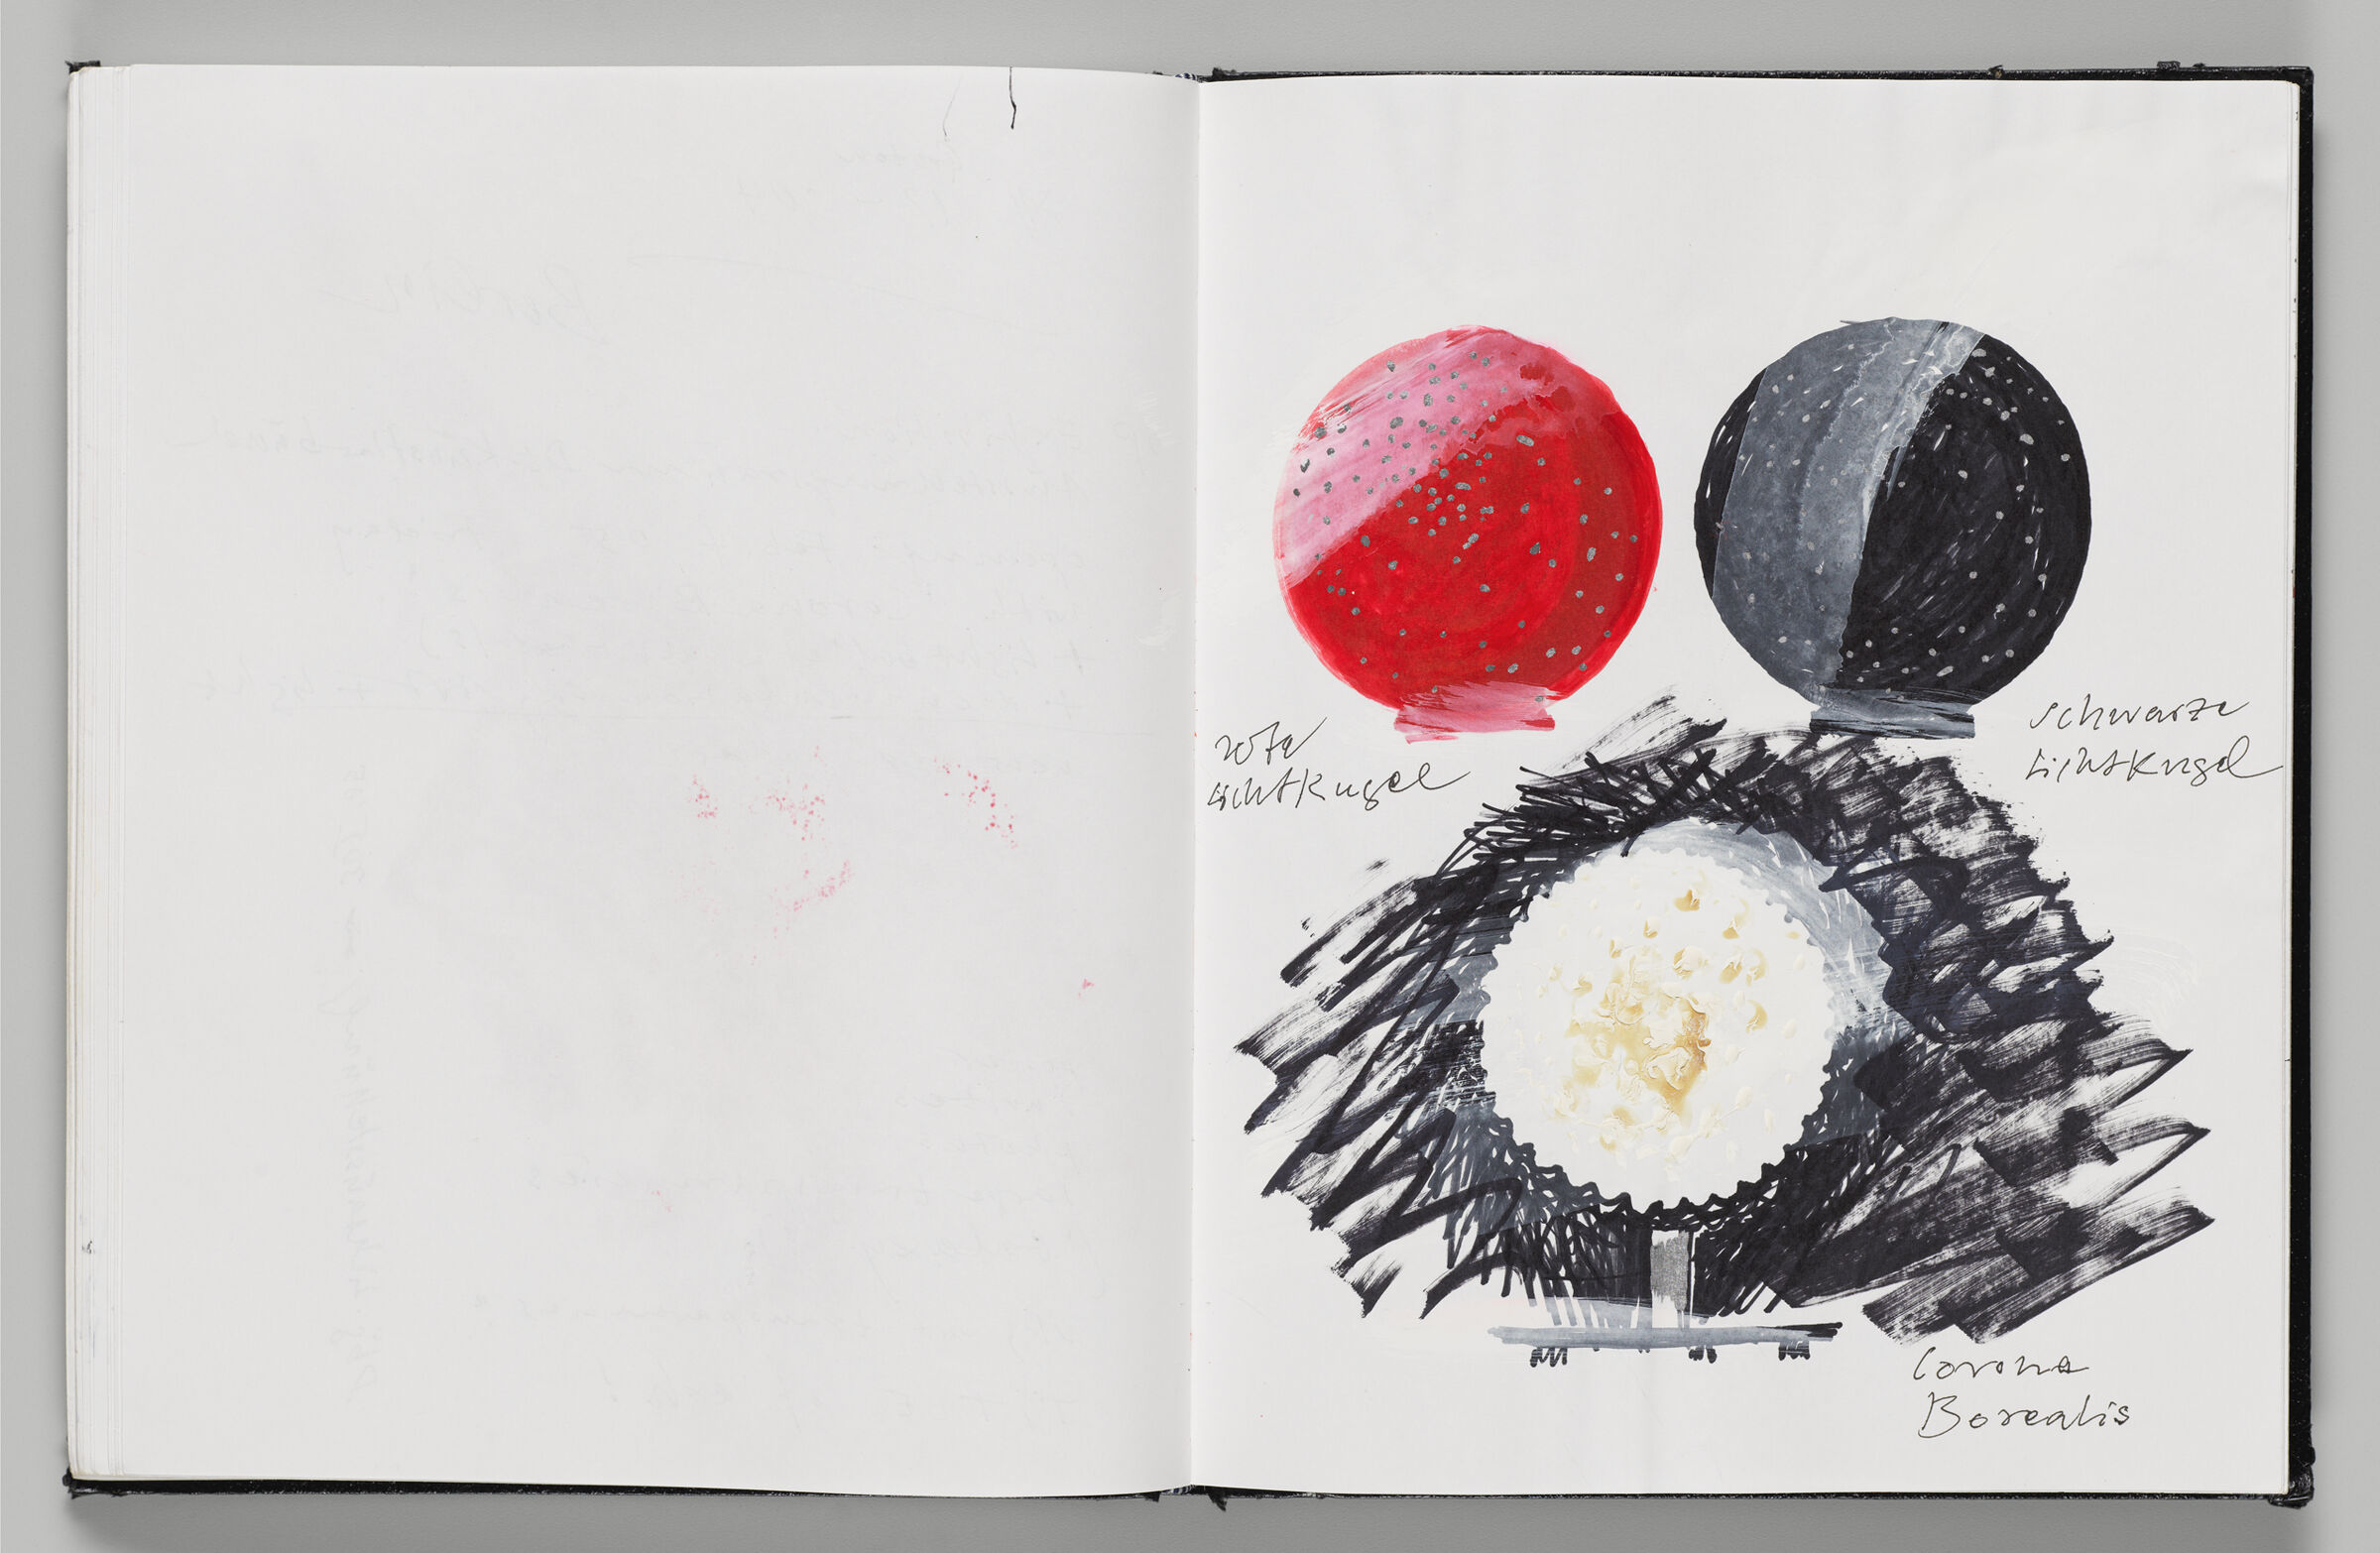 Untitled (Blank, Left Page); Untitled (Light Sculptures, Right Page)